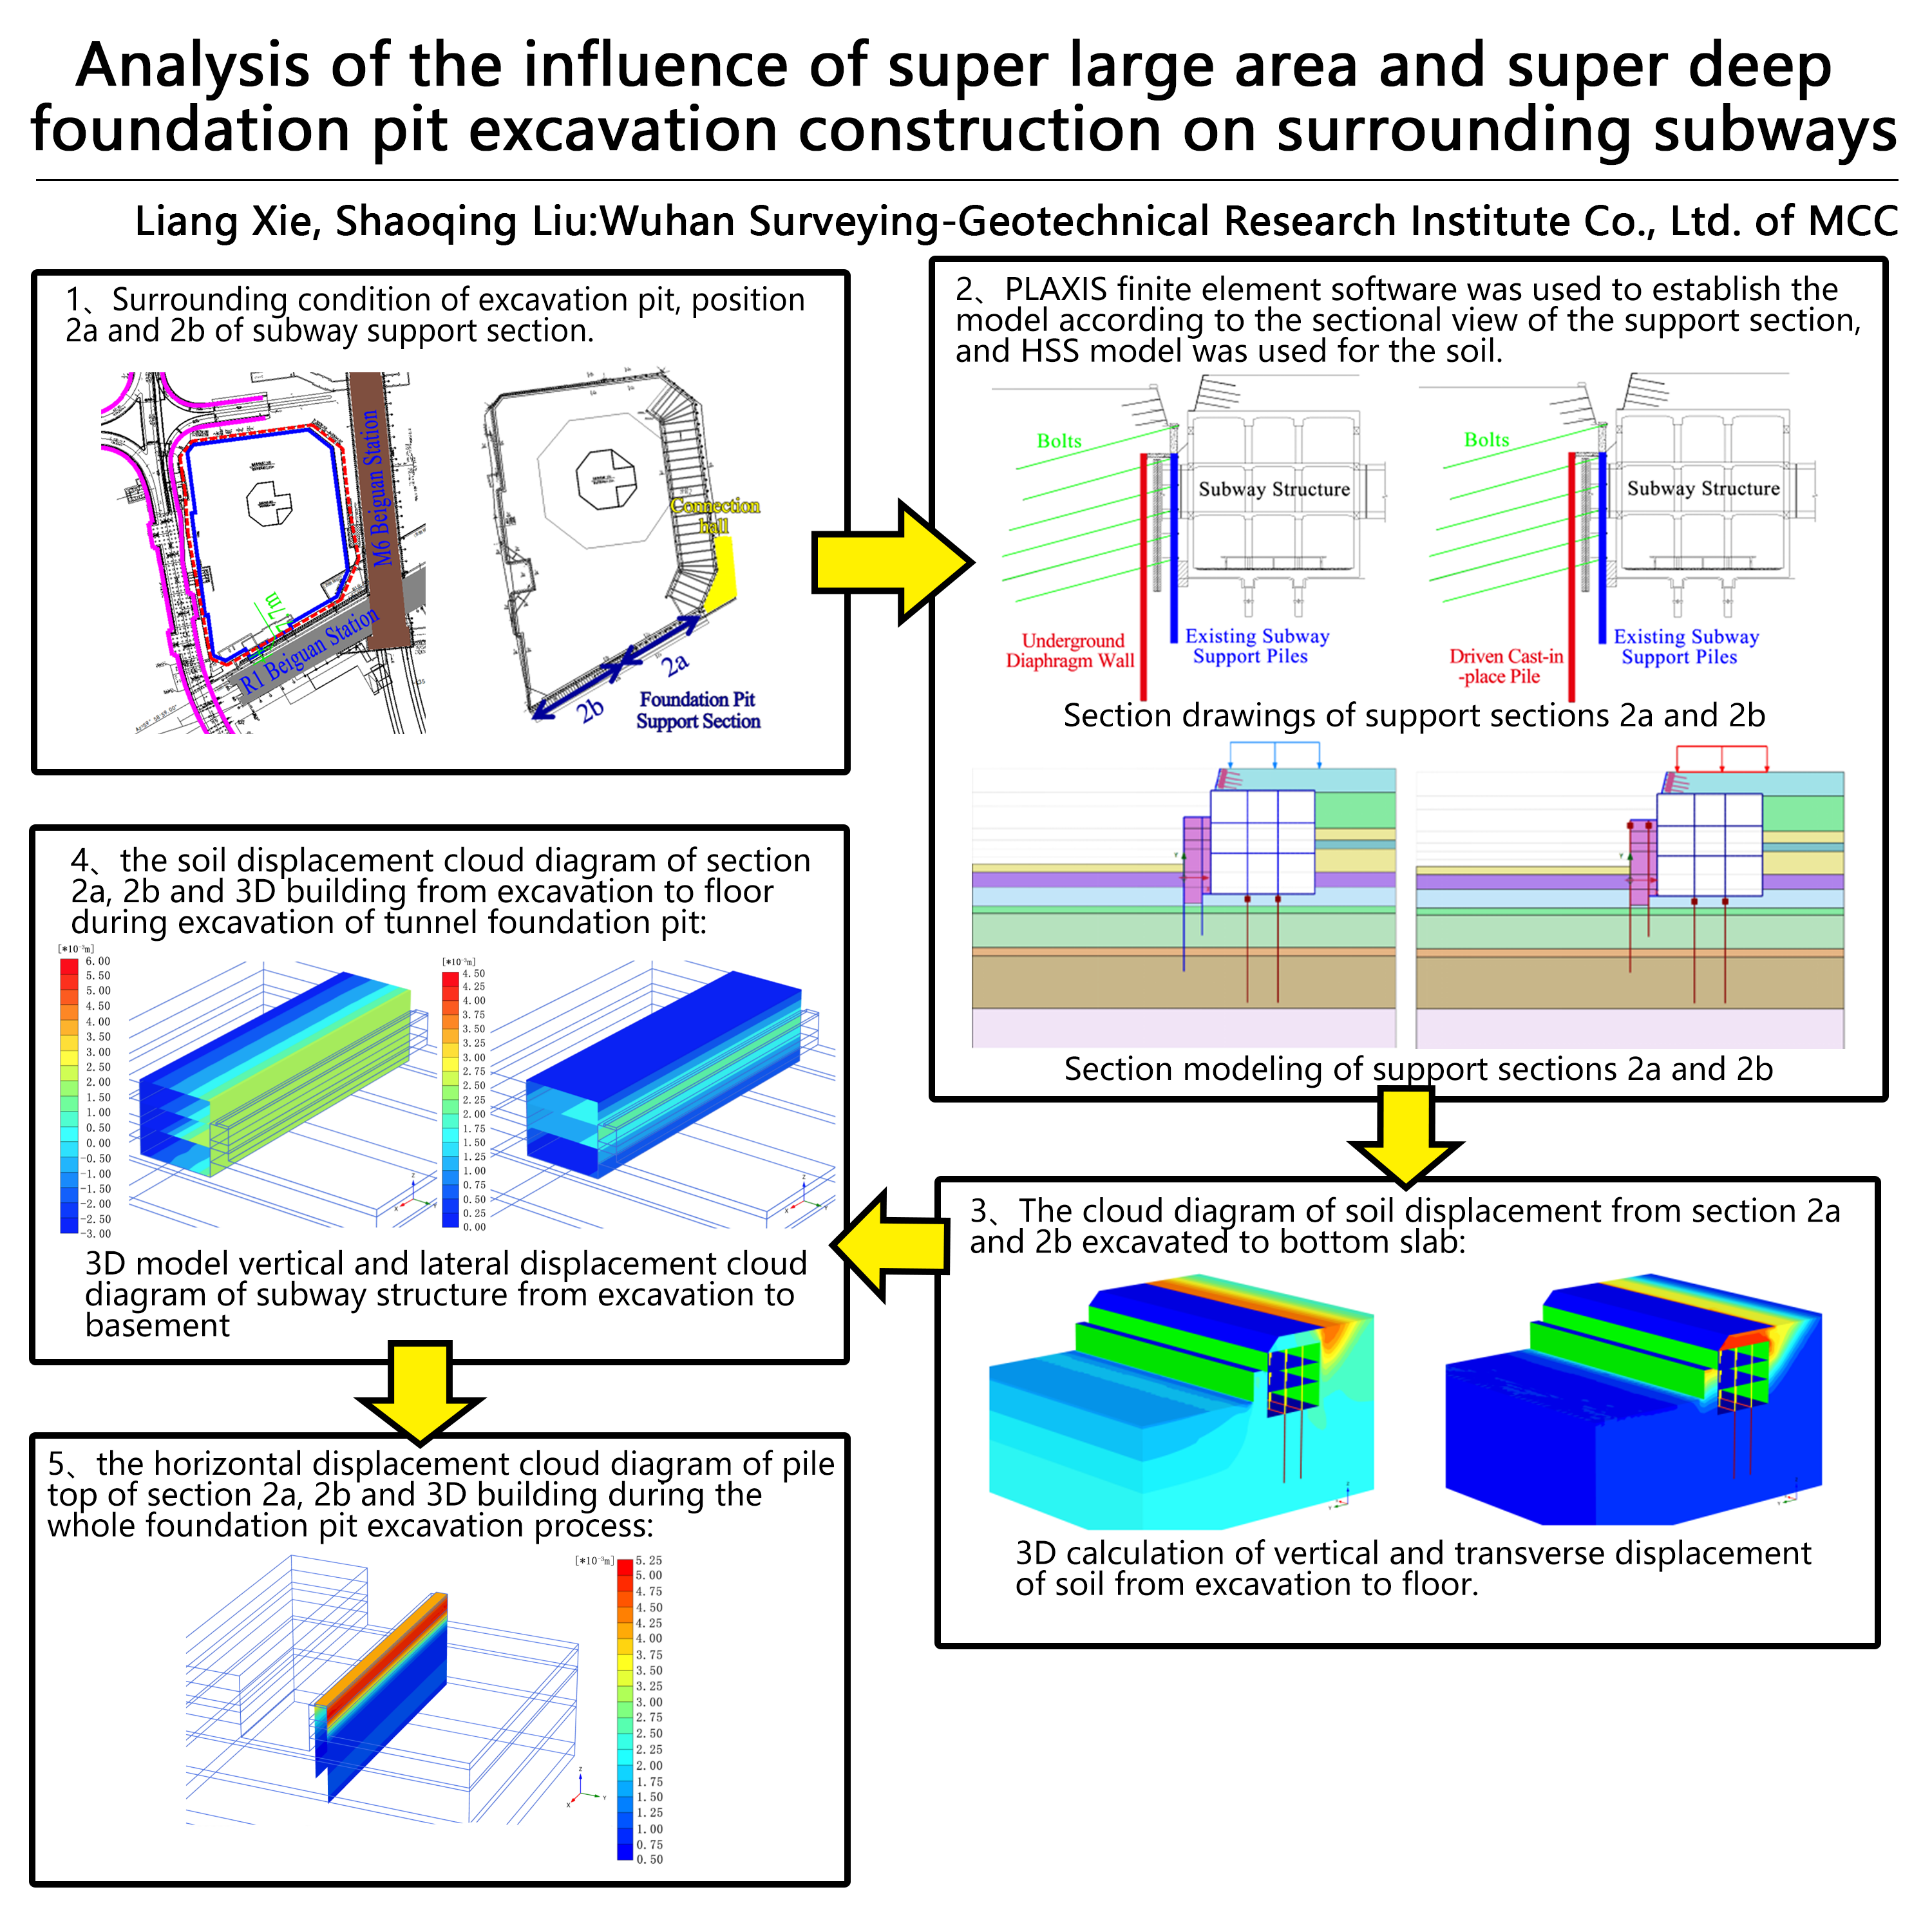 Analysis of the influence of super large area and super deep foundation pit excavation construction on surrounding subways